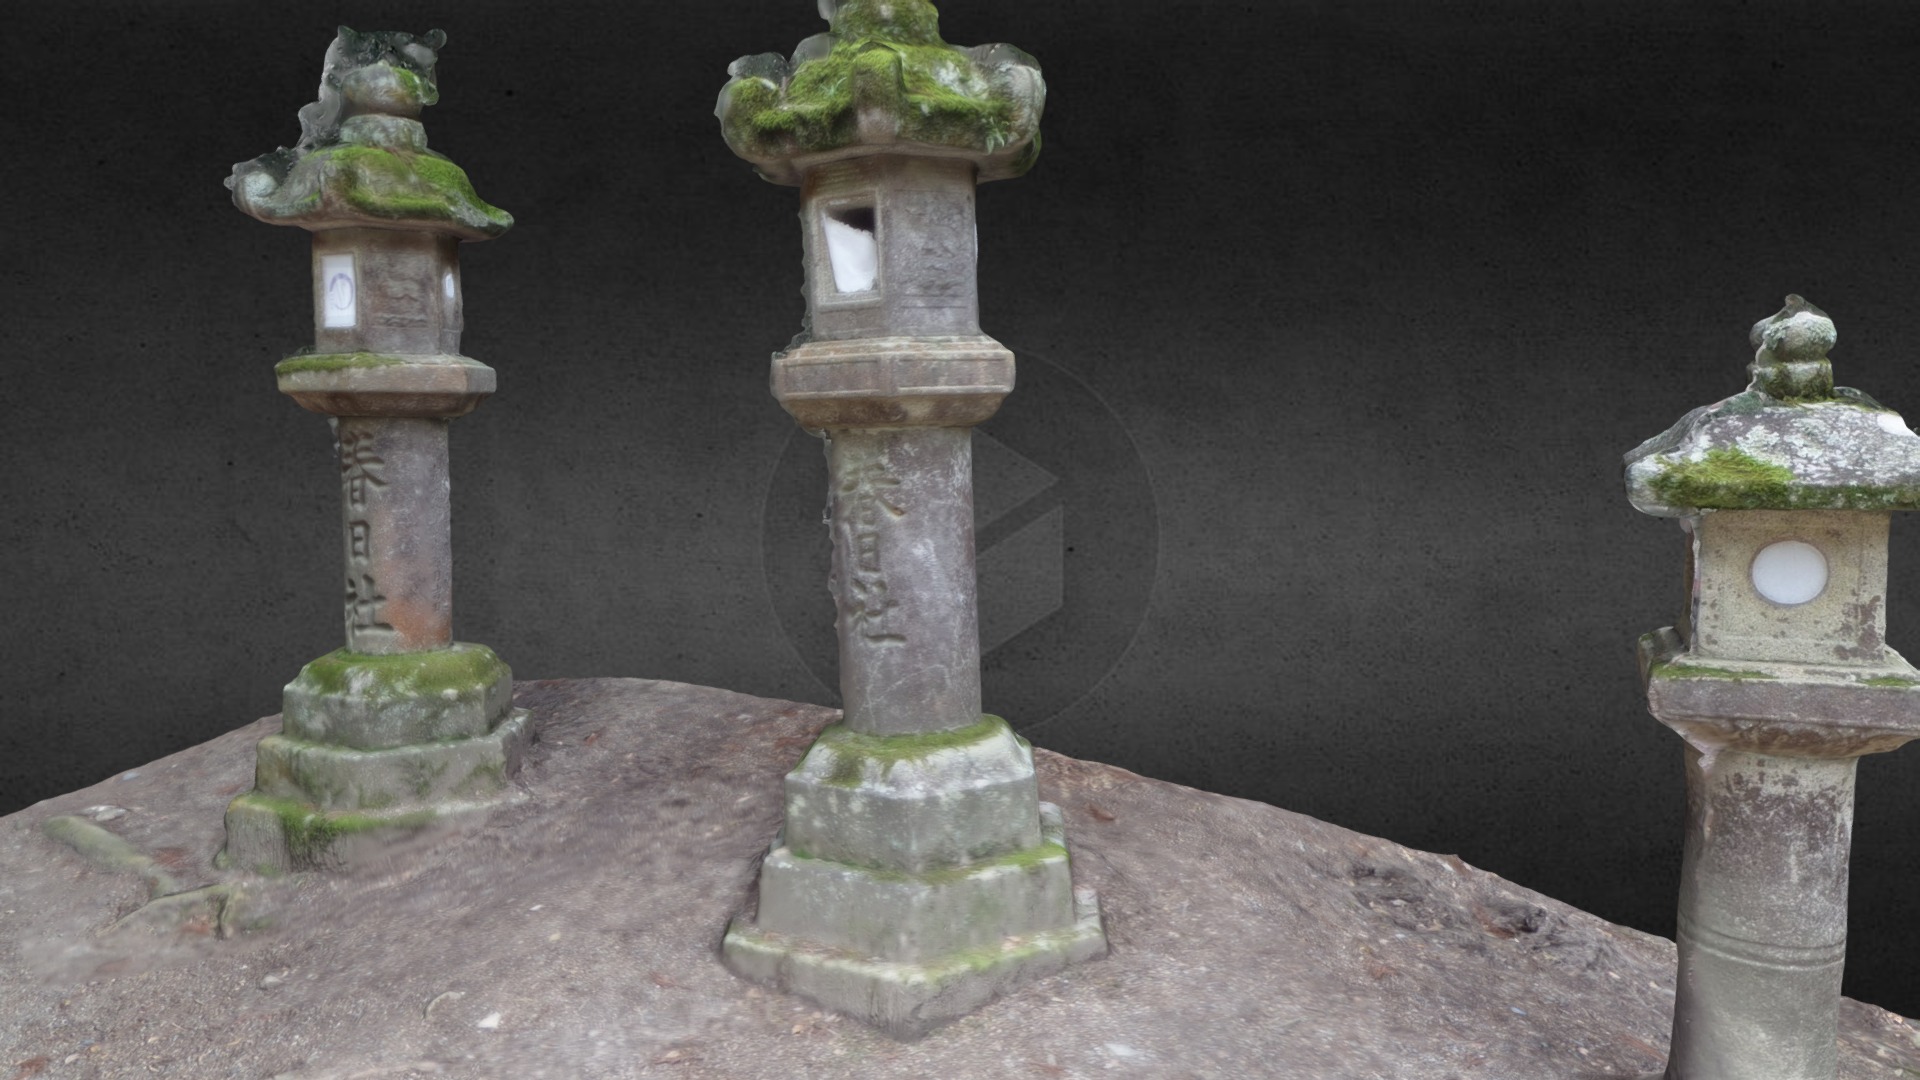 3D model 3 of the 10’000 Lanterns - This is a 3D model of the 3 of the 10'000 Lanterns. The 3D model is about a group of stone pillars.